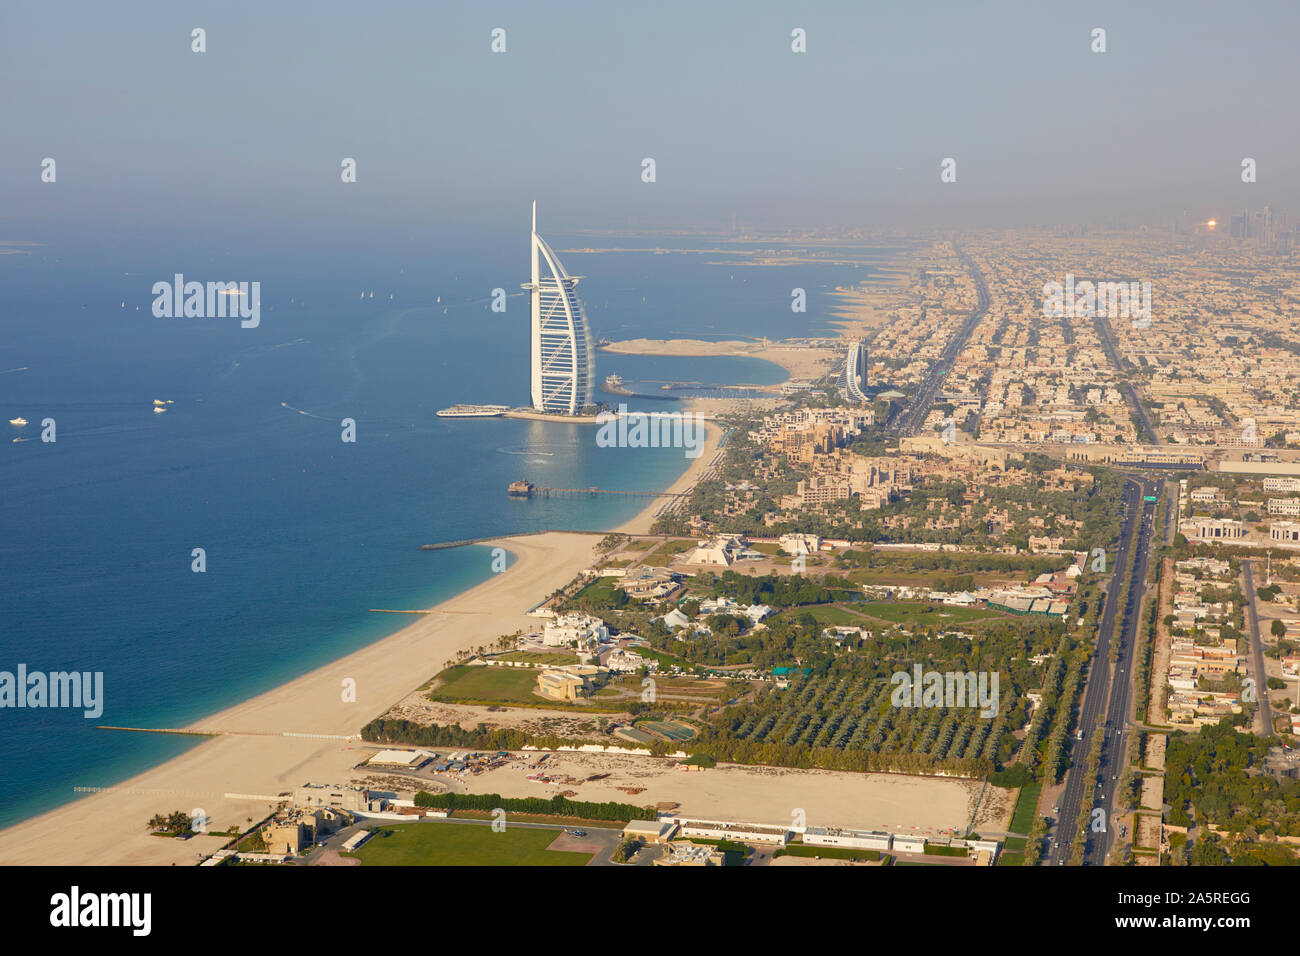 Aerial view of the city with the Al Arab seen from the helicopter, Dubai, United Arab Emirates Stock Photo